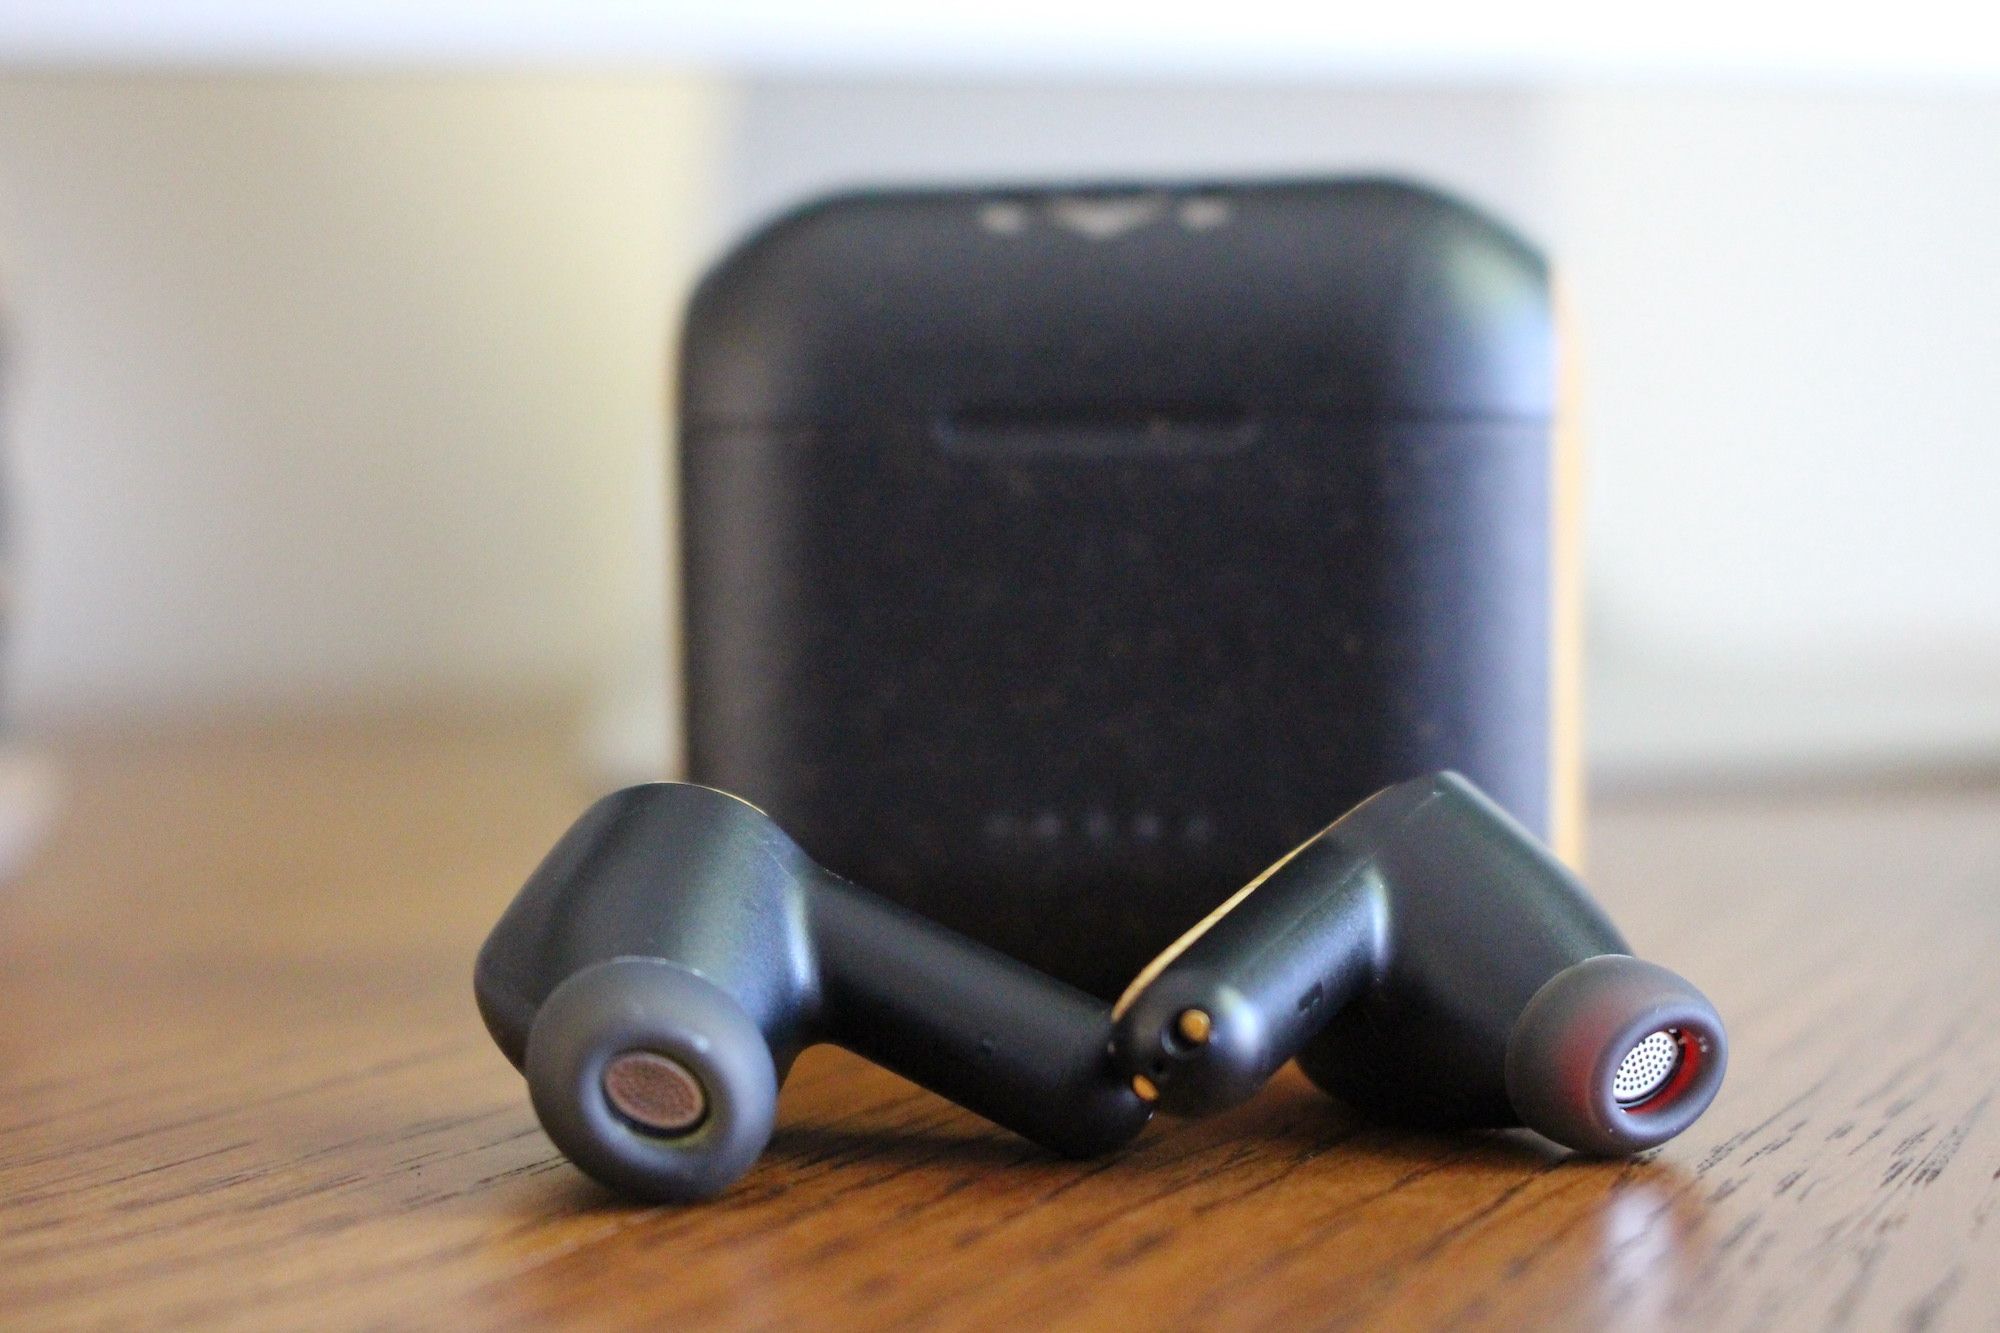 House of Marley Rebel True Wireless Earbuds Review